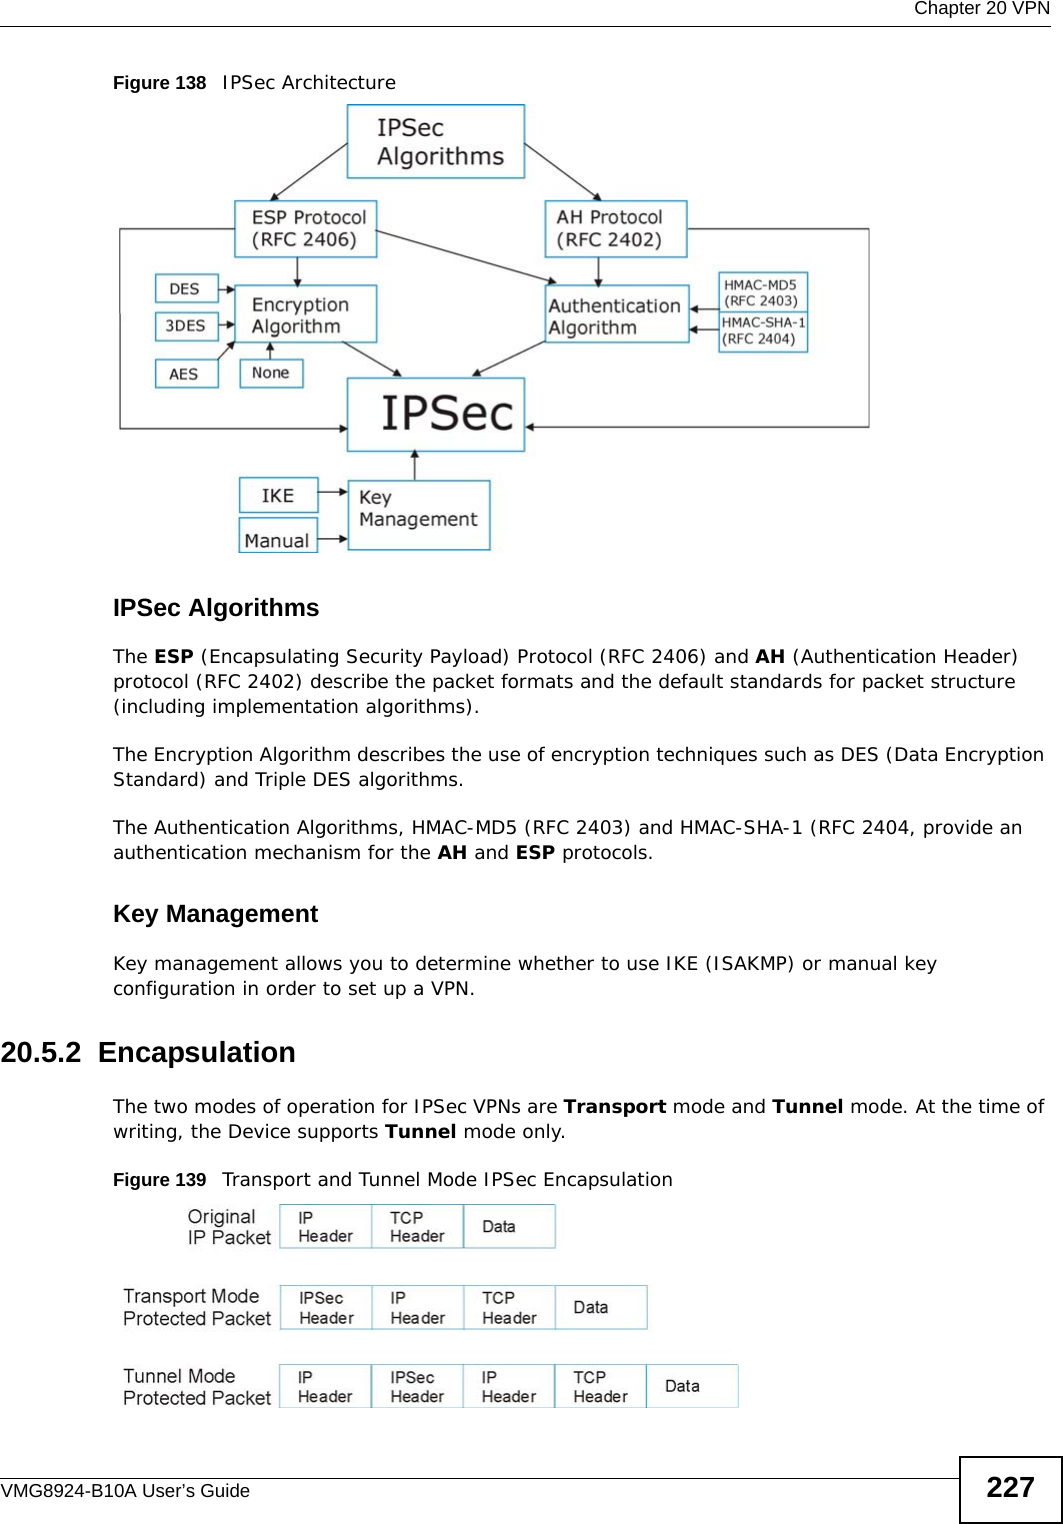  Chapter 20 VPNVMG8924-B10A User’s Guide 227Figure 138   IPSec ArchitectureIPSec AlgorithmsThe ESP (Encapsulating Security Payload) Protocol (RFC 2406) and AH (Authentication Header) protocol (RFC 2402) describe the packet formats and the default standards for packet structure (including implementation algorithms).The Encryption Algorithm describes the use of encryption techniques such as DES (Data Encryption Standard) and Triple DES algorithms.The Authentication Algorithms, HMAC-MD5 (RFC 2403) and HMAC-SHA-1 (RFC 2404, provide an authentication mechanism for the AH and ESP protocols. Key ManagementKey management allows you to determine whether to use IKE (ISAKMP) or manual key configuration in order to set up a VPN.20.5.2  EncapsulationThe two modes of operation for IPSec VPNs are Transport mode and Tunnel mode. At the time of writing, the Device supports Tunnel mode only.Figure 139   Transport and Tunnel Mode IPSec Encapsulation